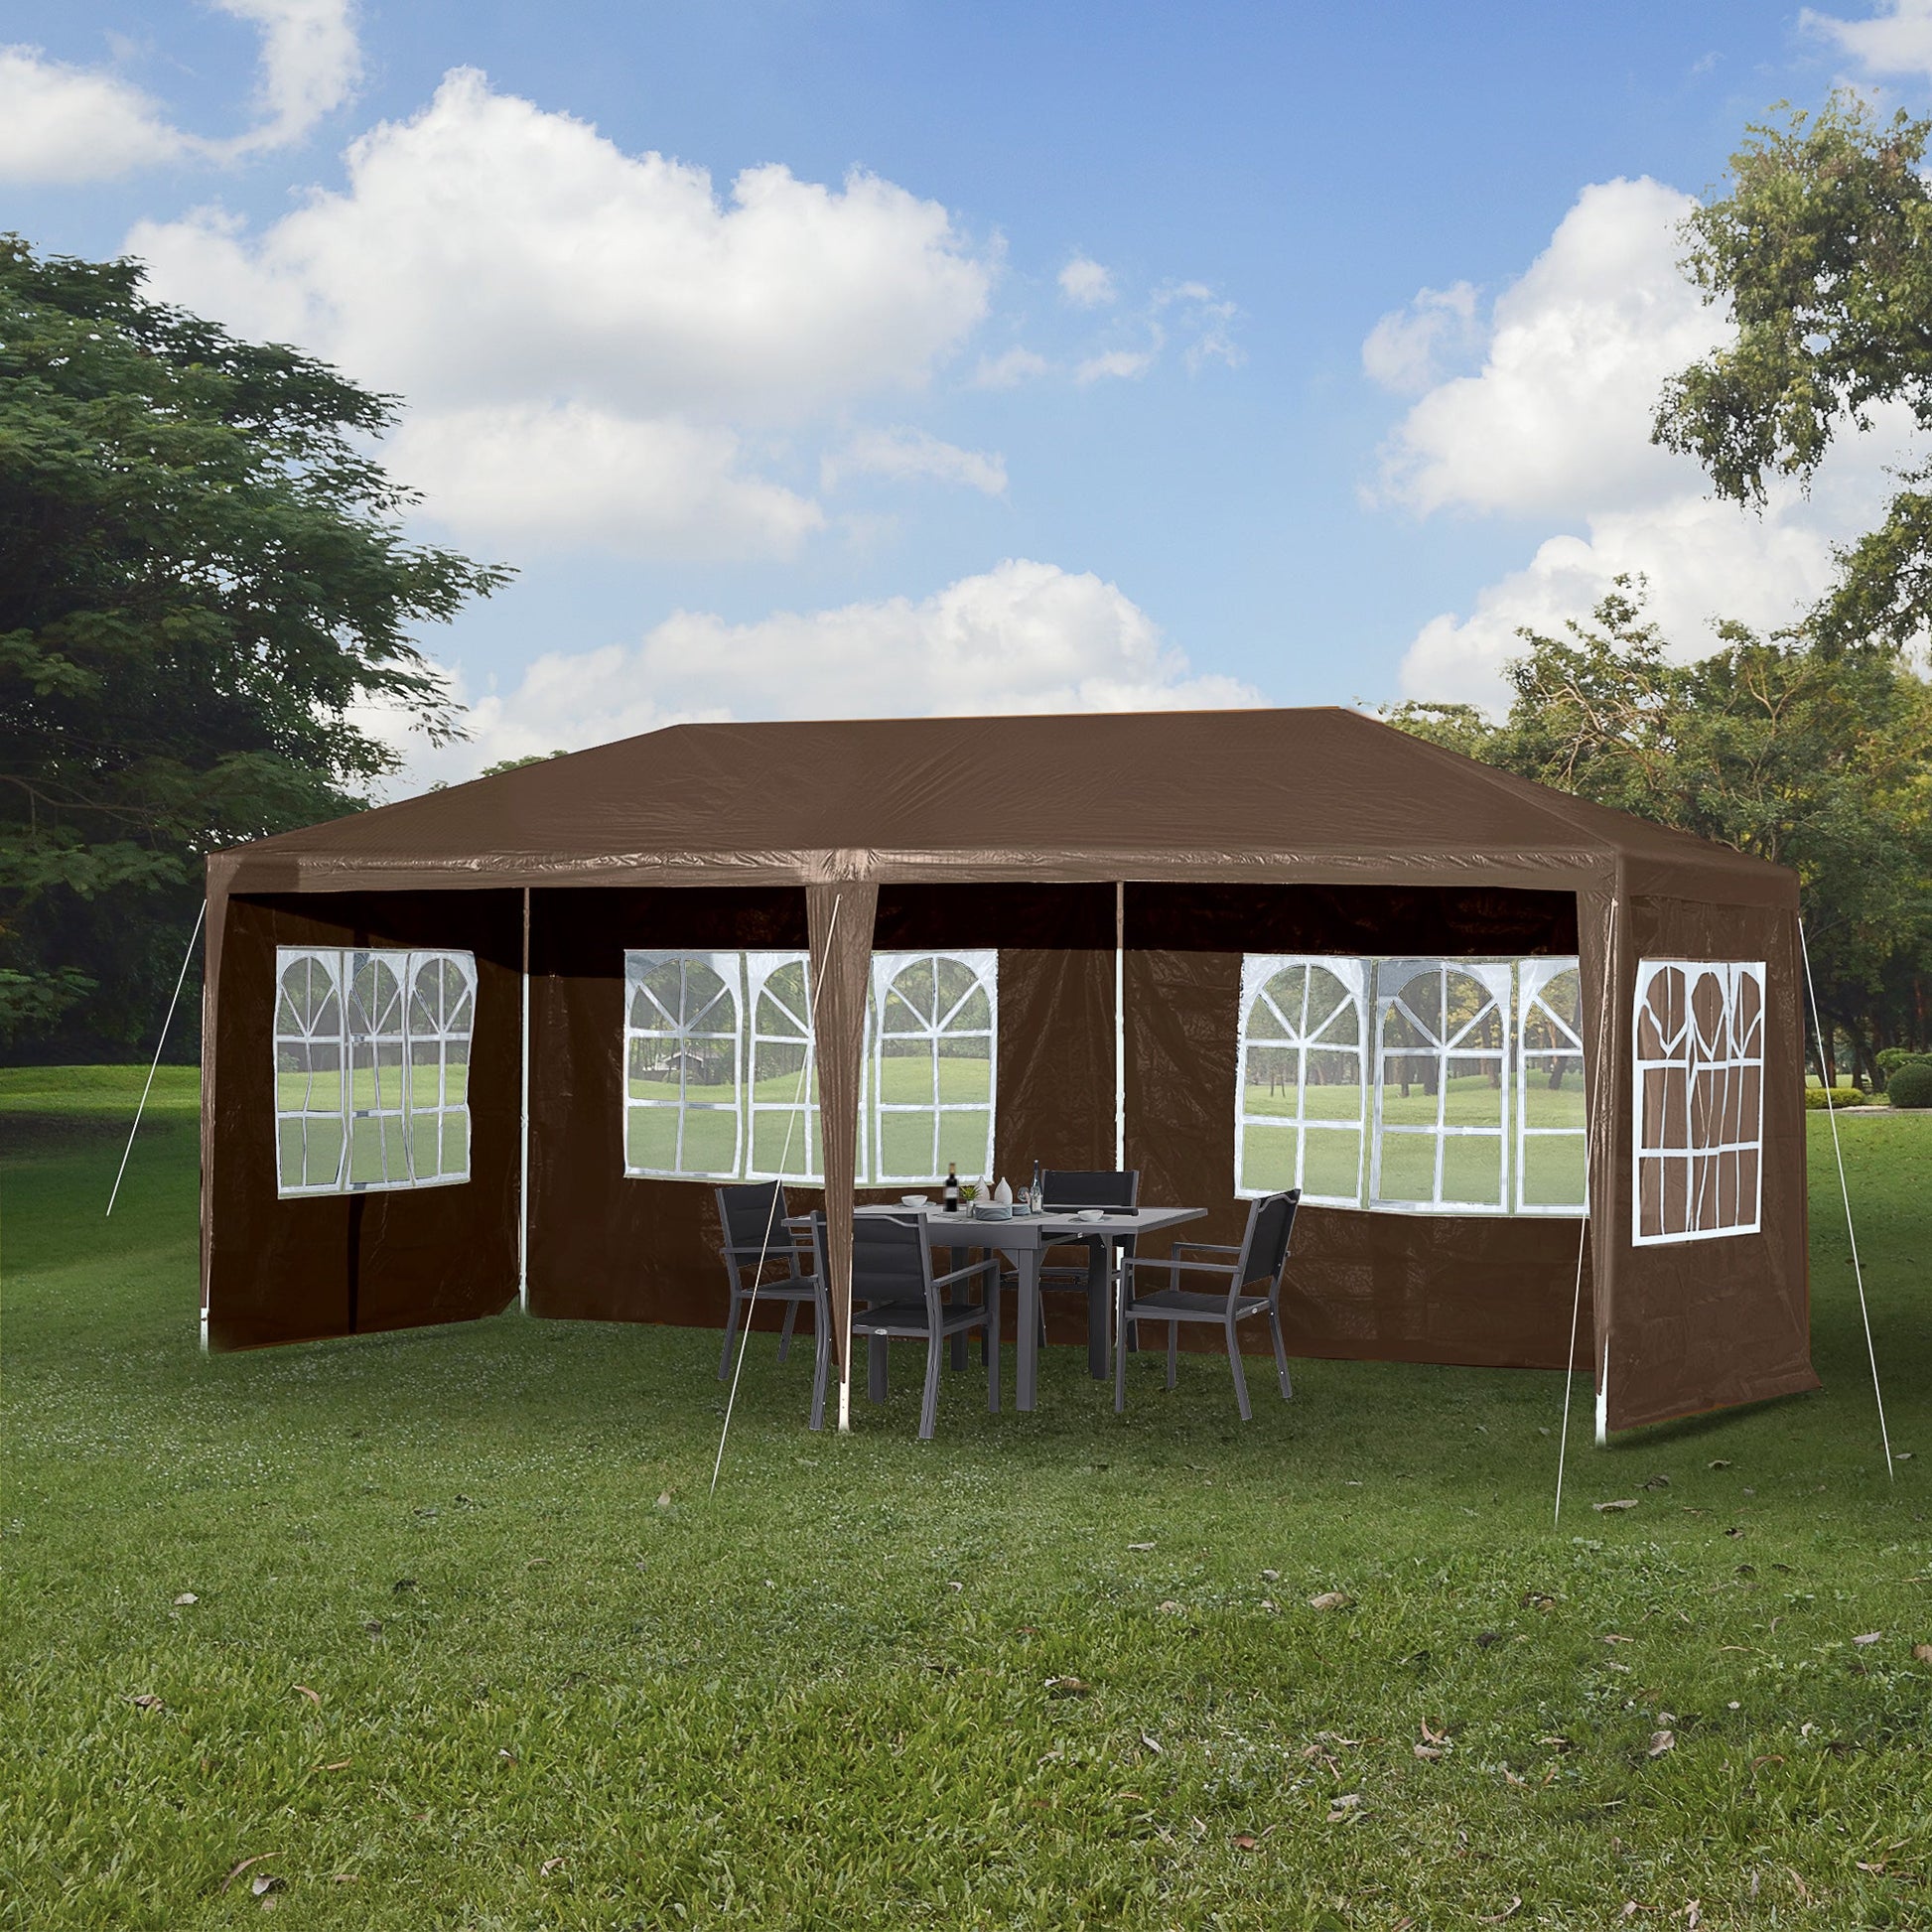 18.7' x 9.4' Party Tent, Portable Folding Wedding Tent, Garden Canopy Event Shelter, Outdoor Sunshade with 4 Removable Sidewalls, Coffee at Gallery Canada